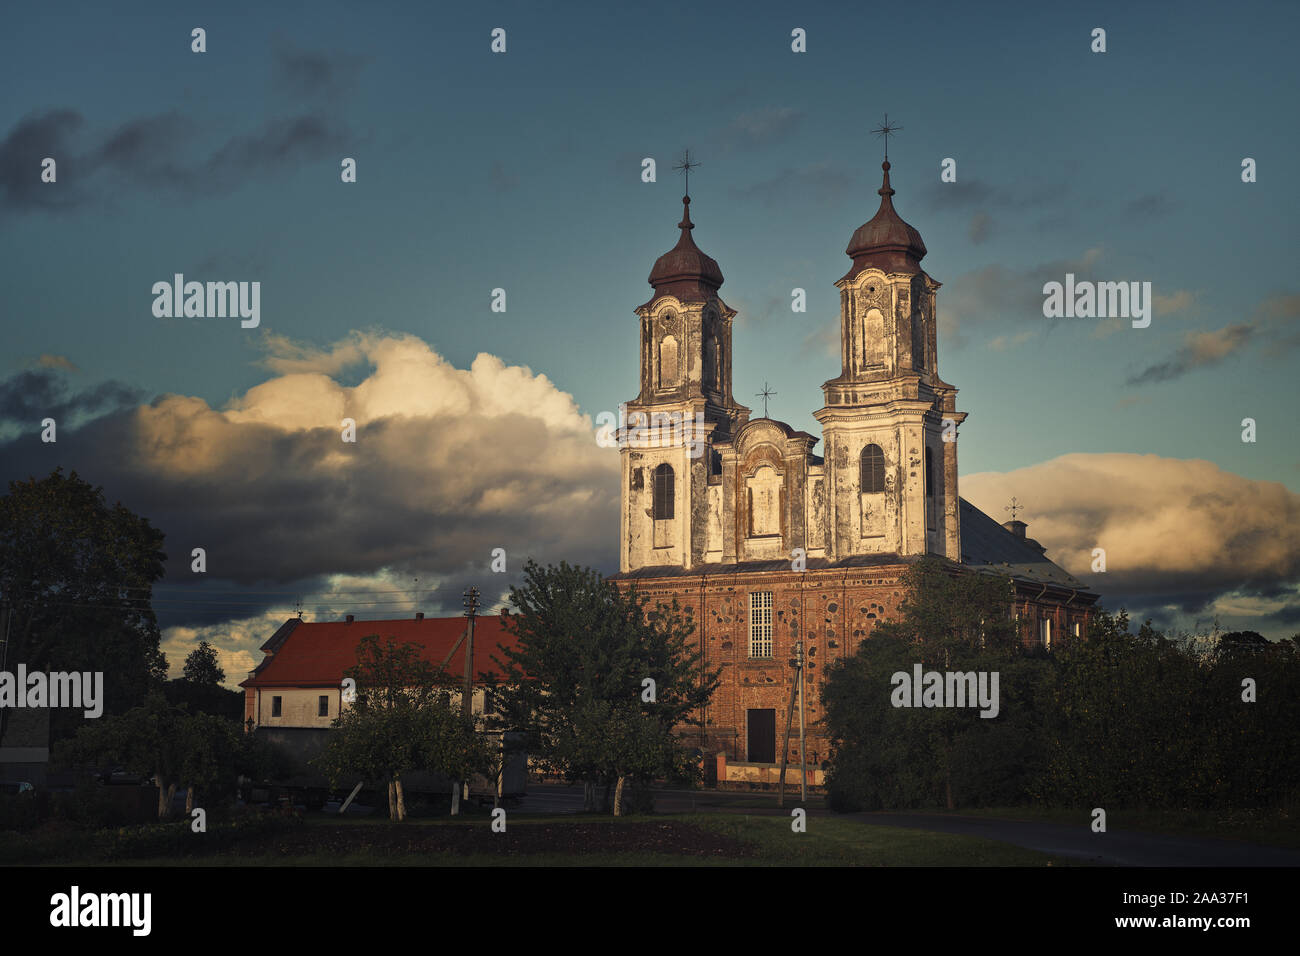 Dotnuva church and Monastery of the Lord Revelation for St Mary the Virgin, Dotnuva, Lithuania Stock Photo